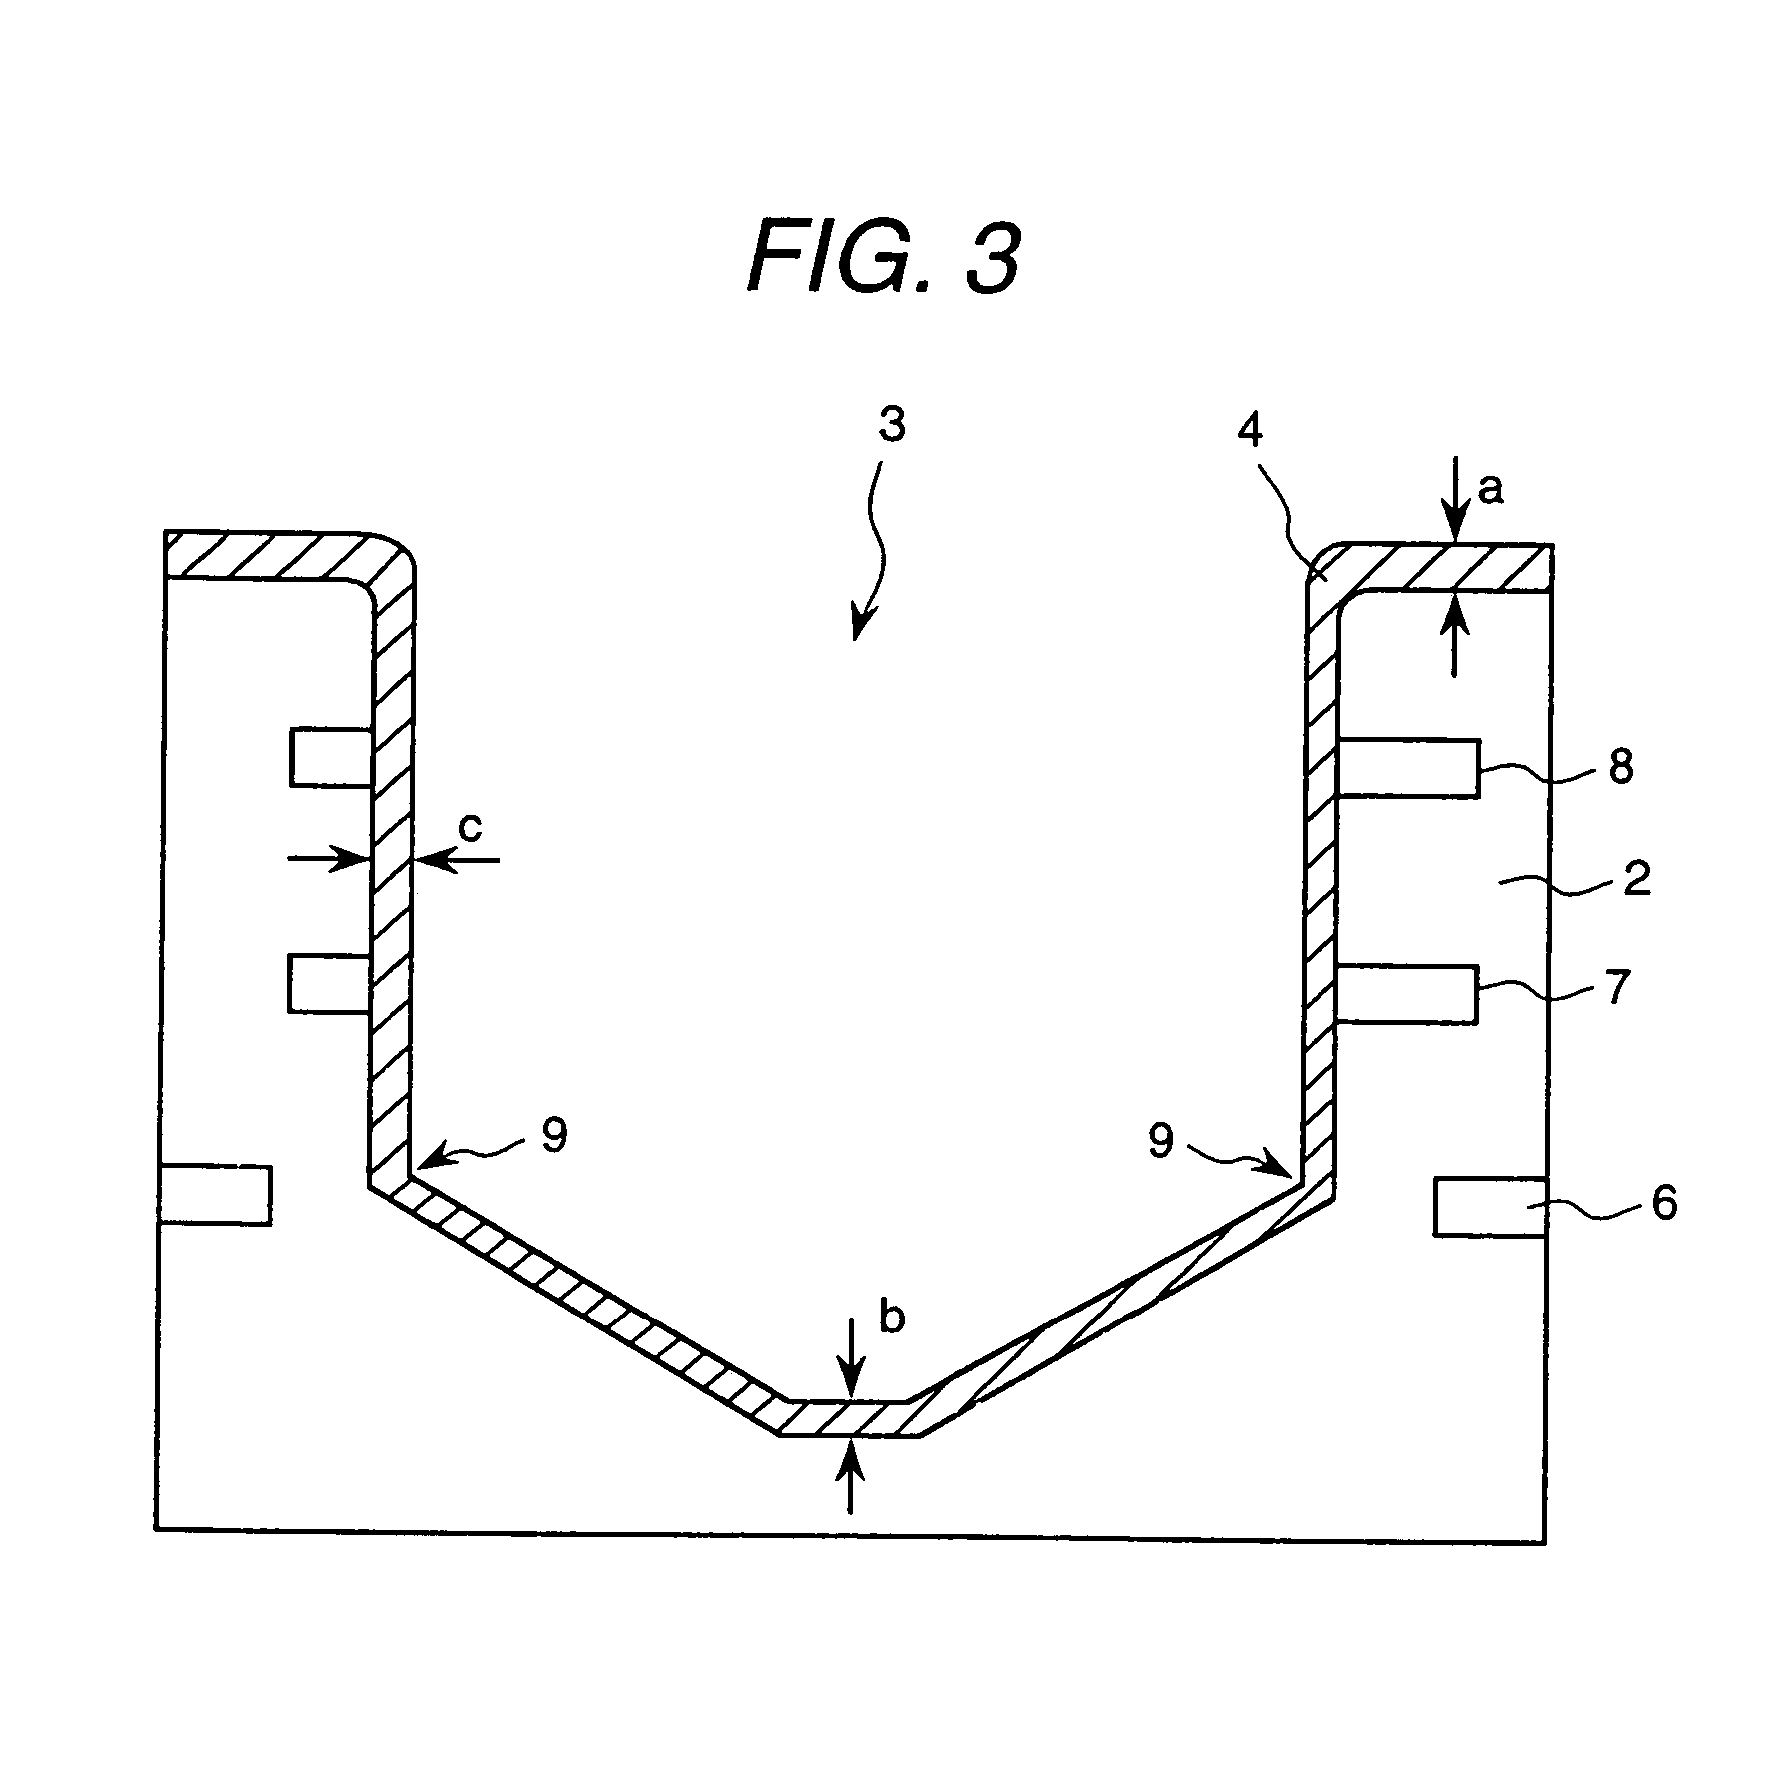 Method of manufacturing a wiring substrate and an electroless copper plating solution for providing interlayer connections